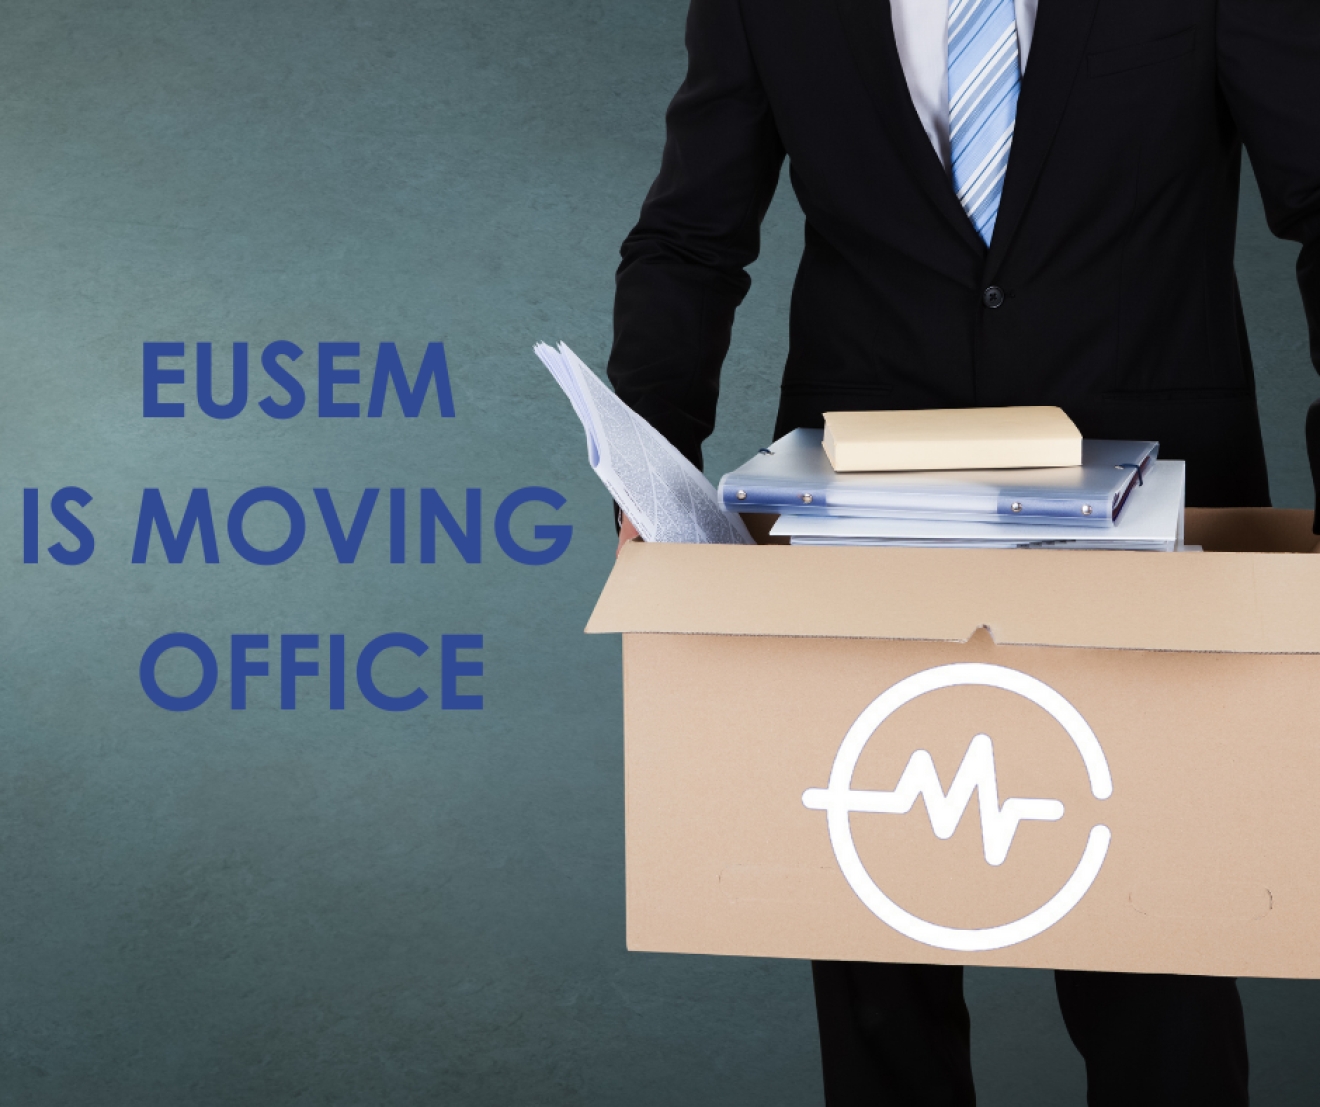 EUSEM is moving